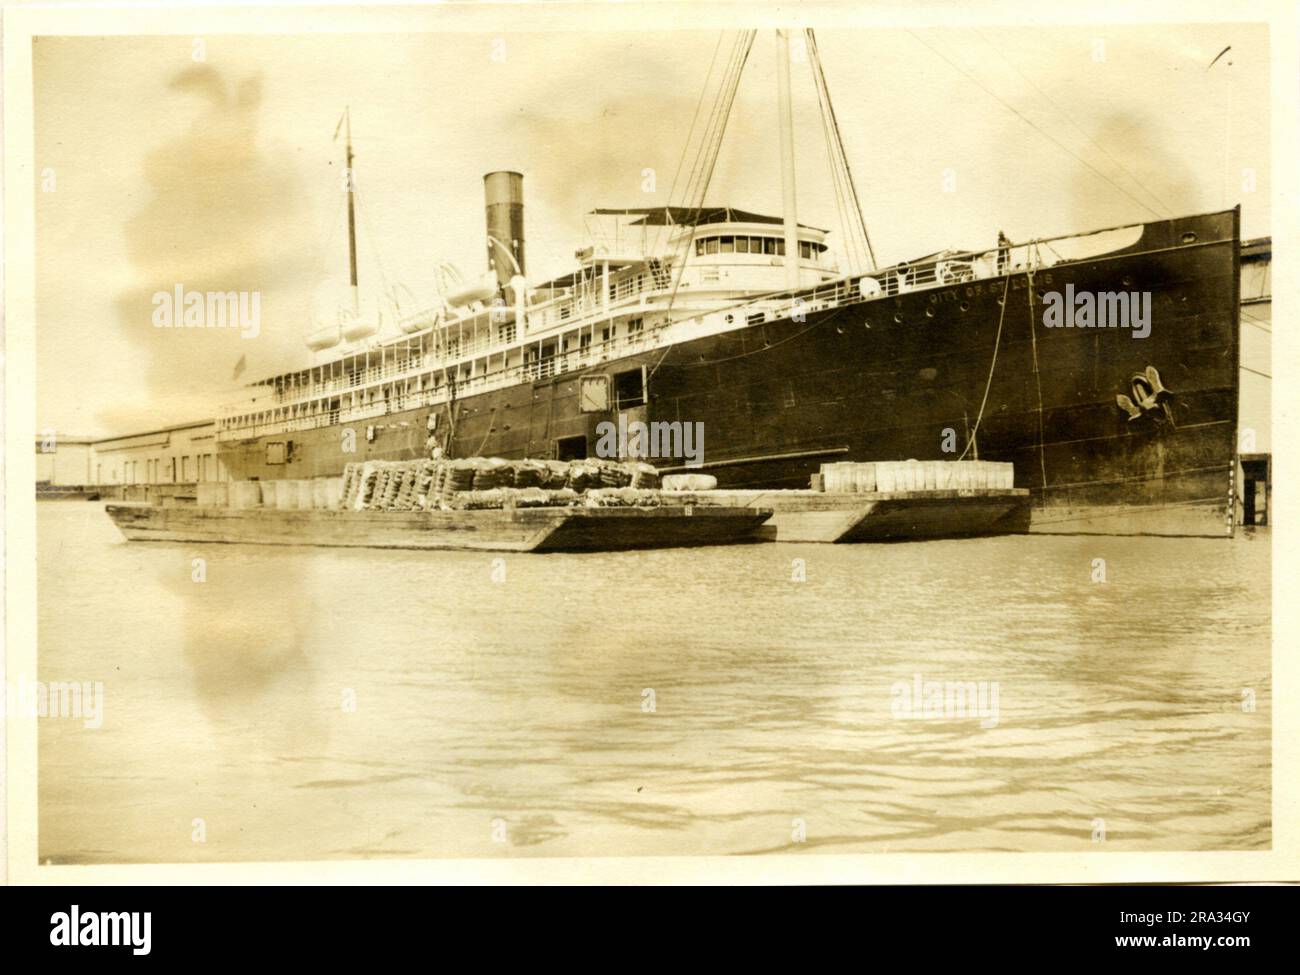 Photograph of the Starboard View of the SS City of St. Louis. Starboard View. Date: - July 19, 1918. Photograph Of: - S. S. City Of St Louis. Nationality: - American. Tonnage: - 5425. Captain: - L. Dalzell. Owners: - Ocean S. S. Co. Where From: - Boston, Mass. Destination: - Boston, Mass. Where Photographed: - Savannah, GA. Sixth Naval District. By Whom Photographed: - J. B. Dearborn. Date Photographed: - July 13th., 1918.. 1918-07-13T00:00:00. Stock Photo